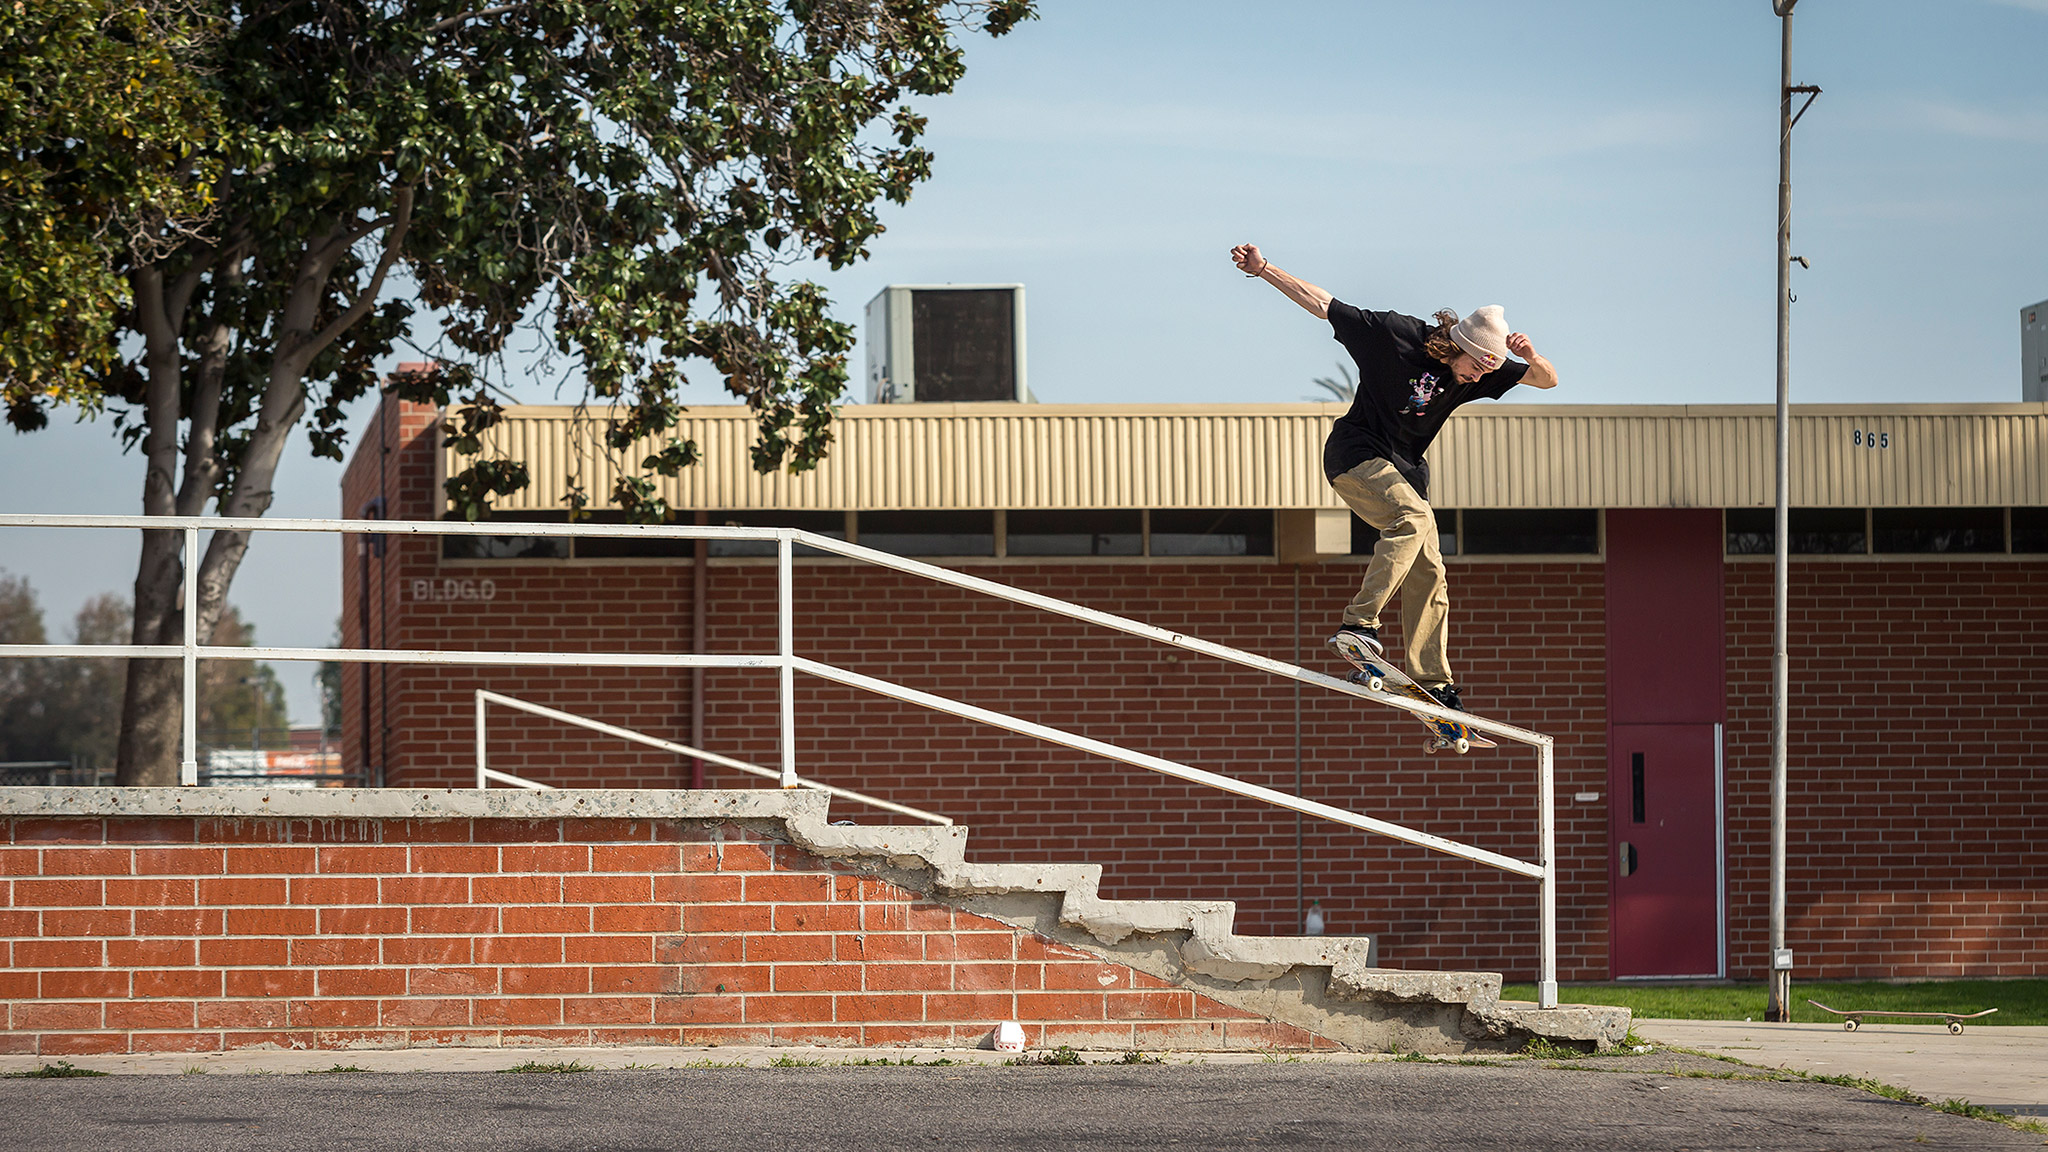 Torrey Pudwill, frontside smith.